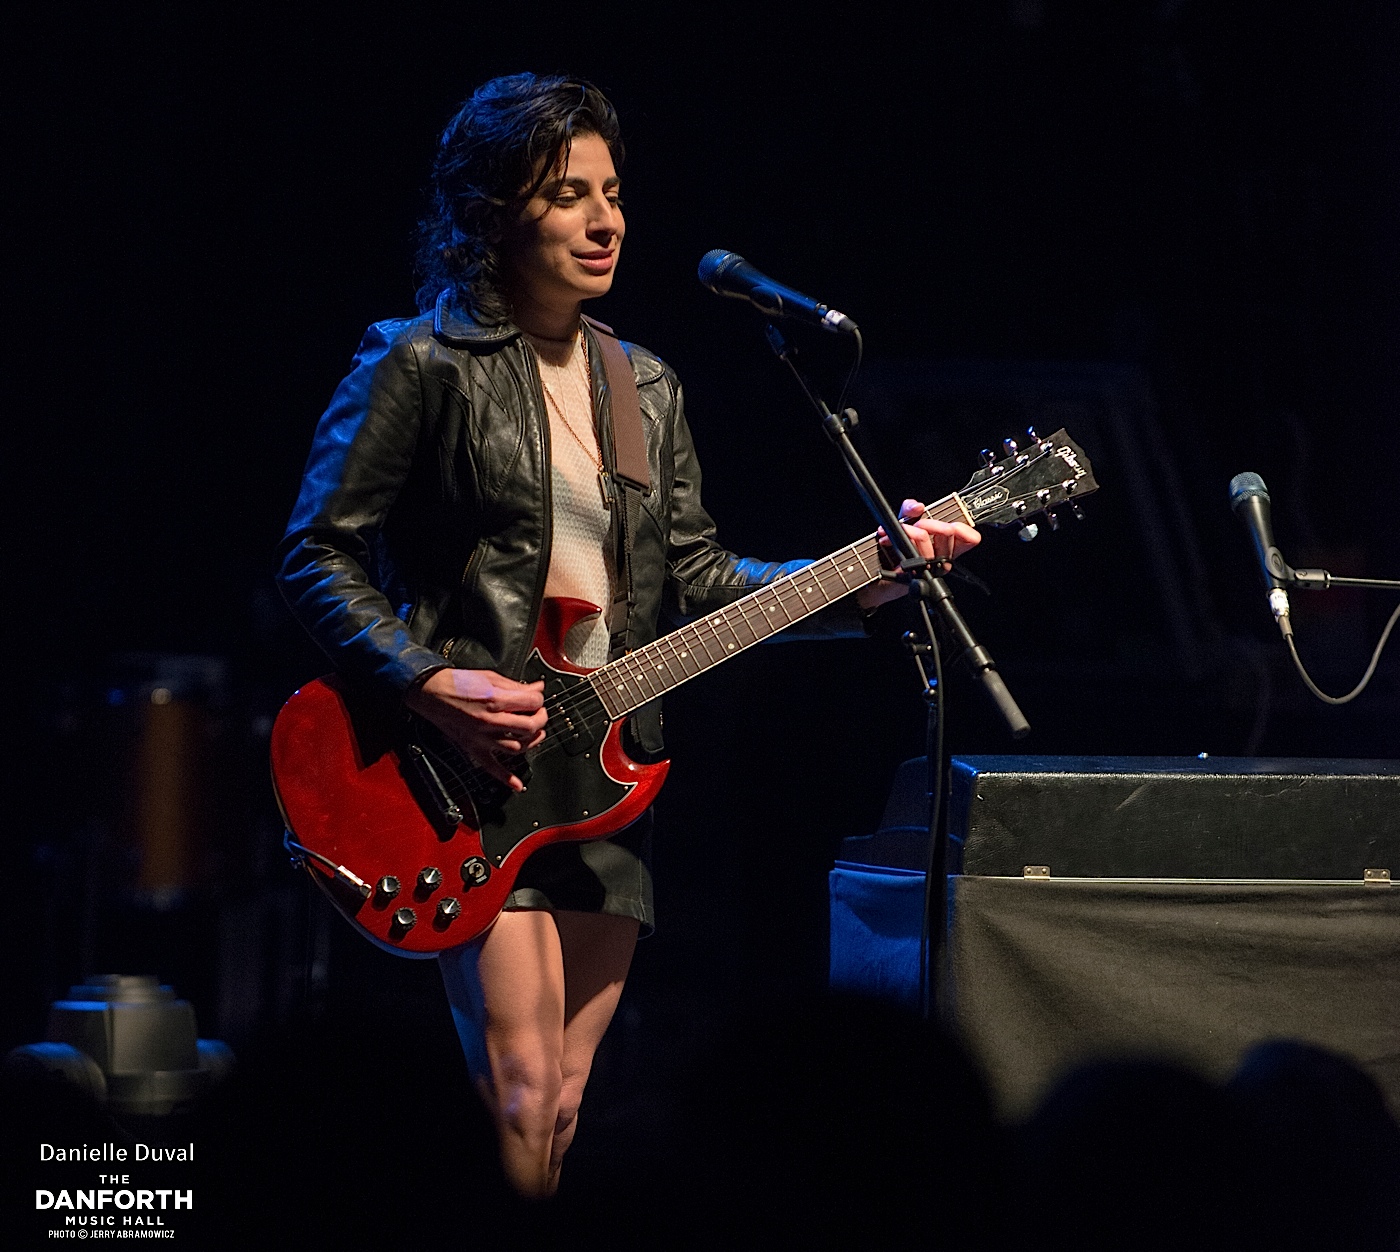 DANIELLE DUVAL opens for Serena Ryder at The Danforth Music Hall.